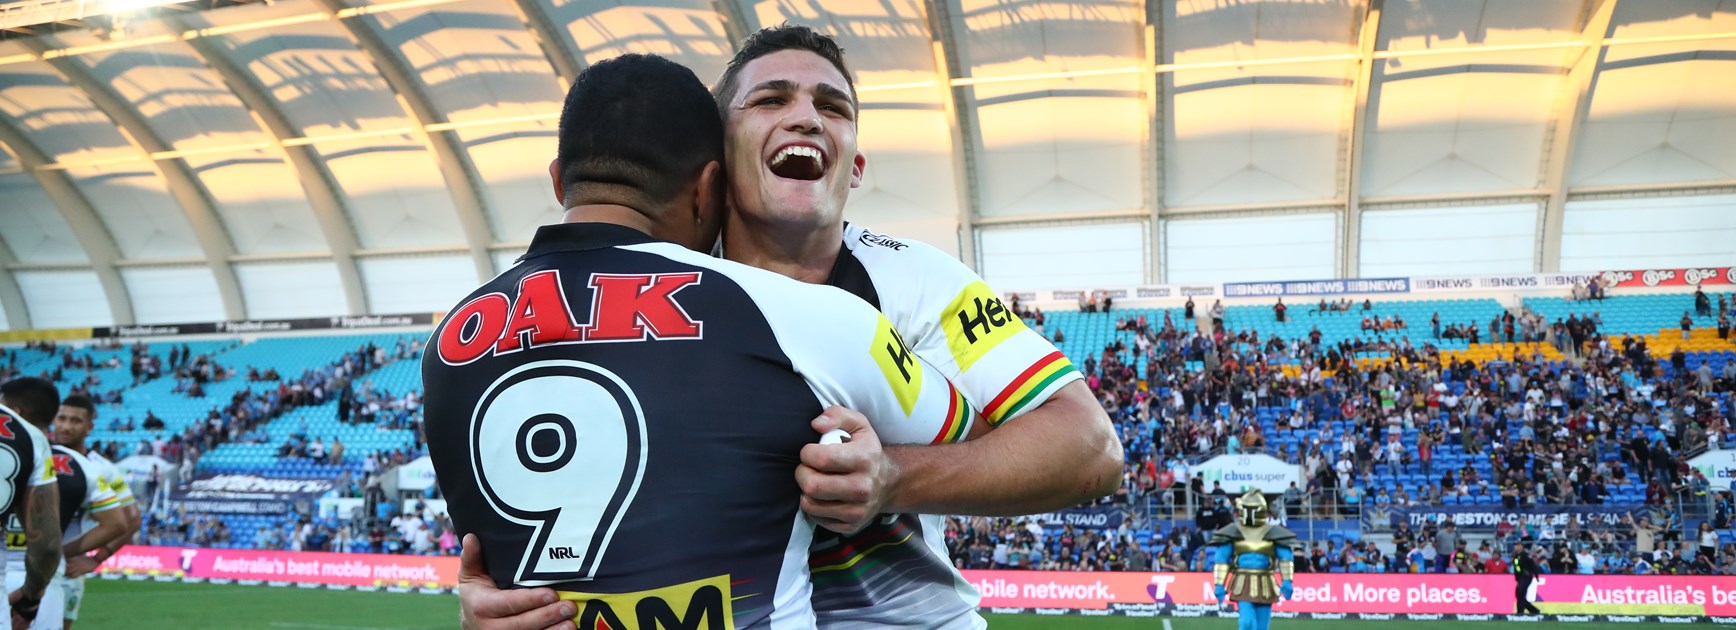 Panthers halfback Nathan Cleary celebrates his match-winning field goal.